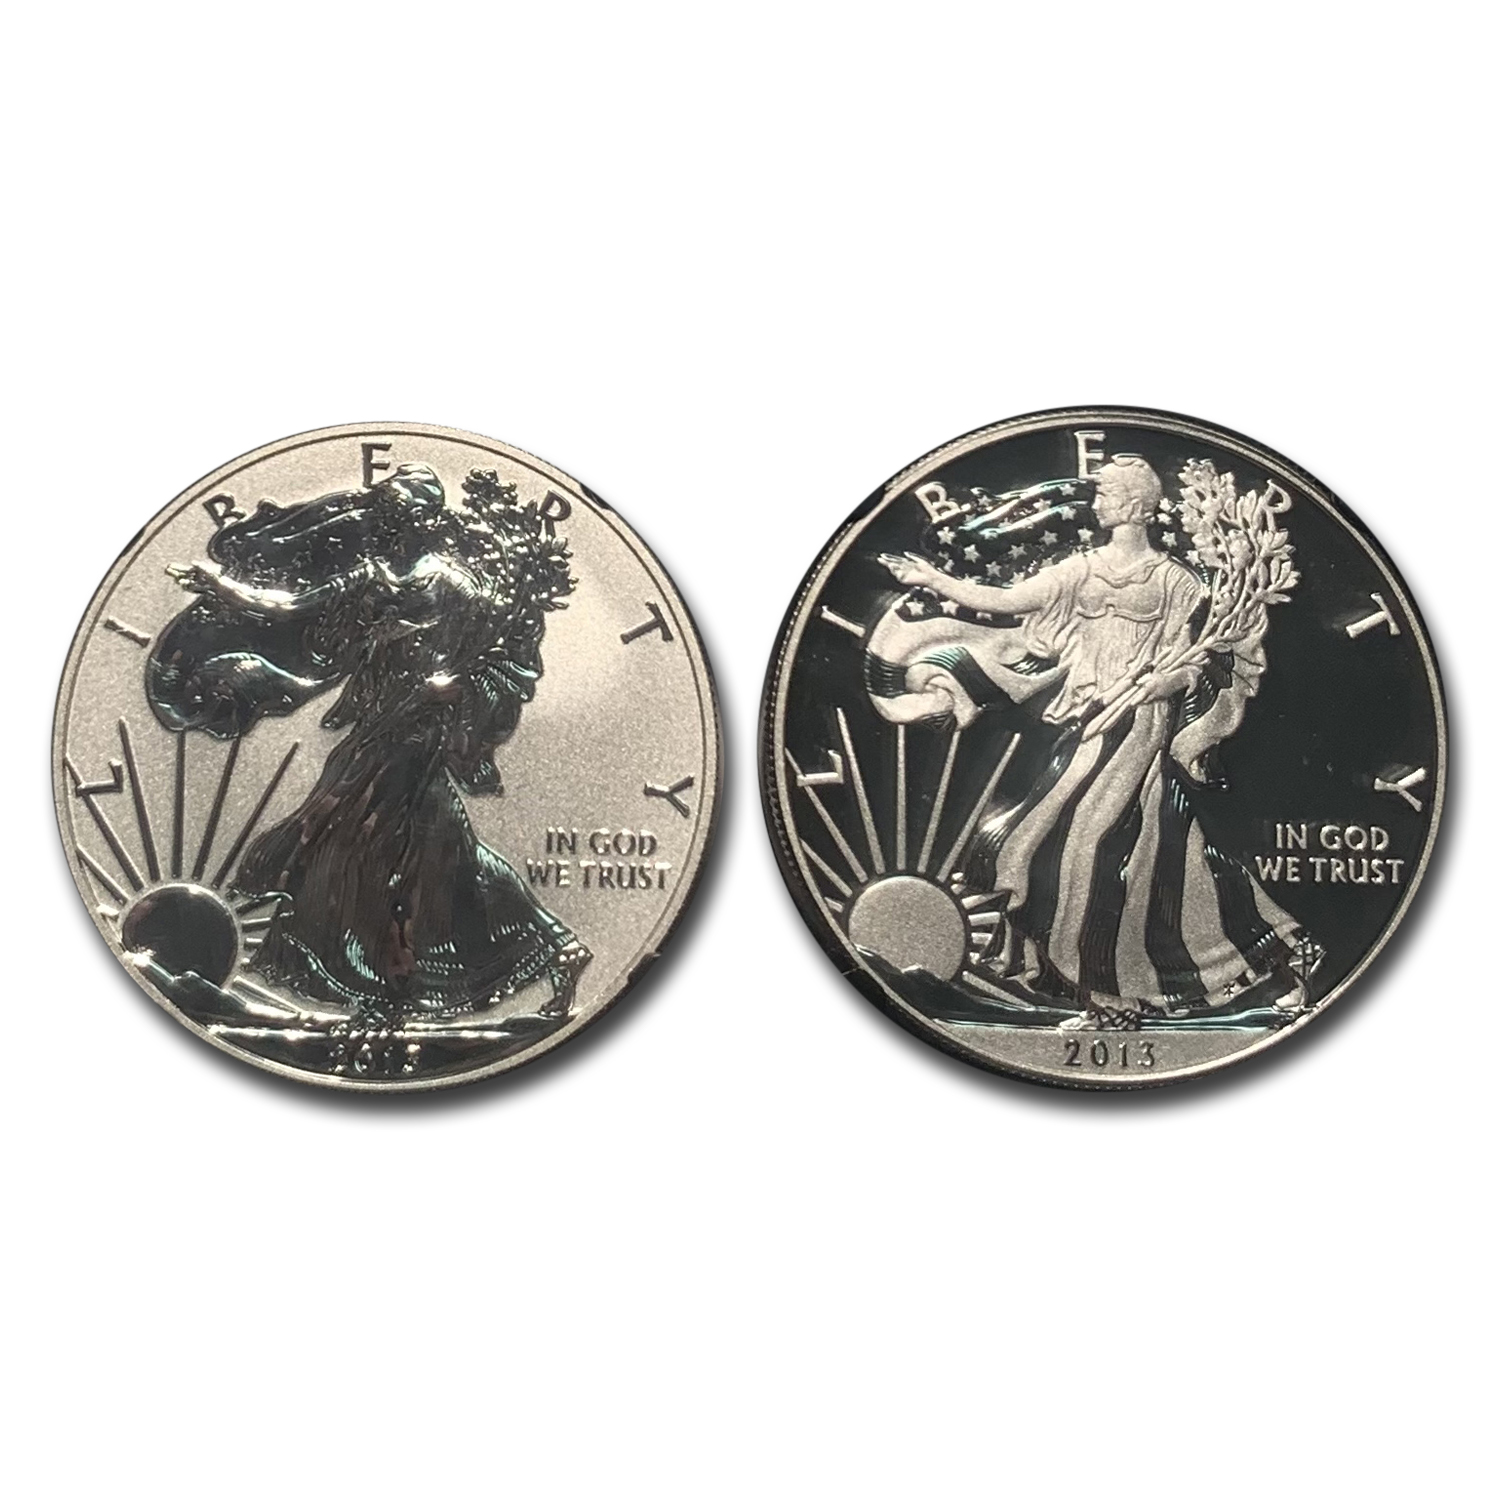 used silver coins for sale